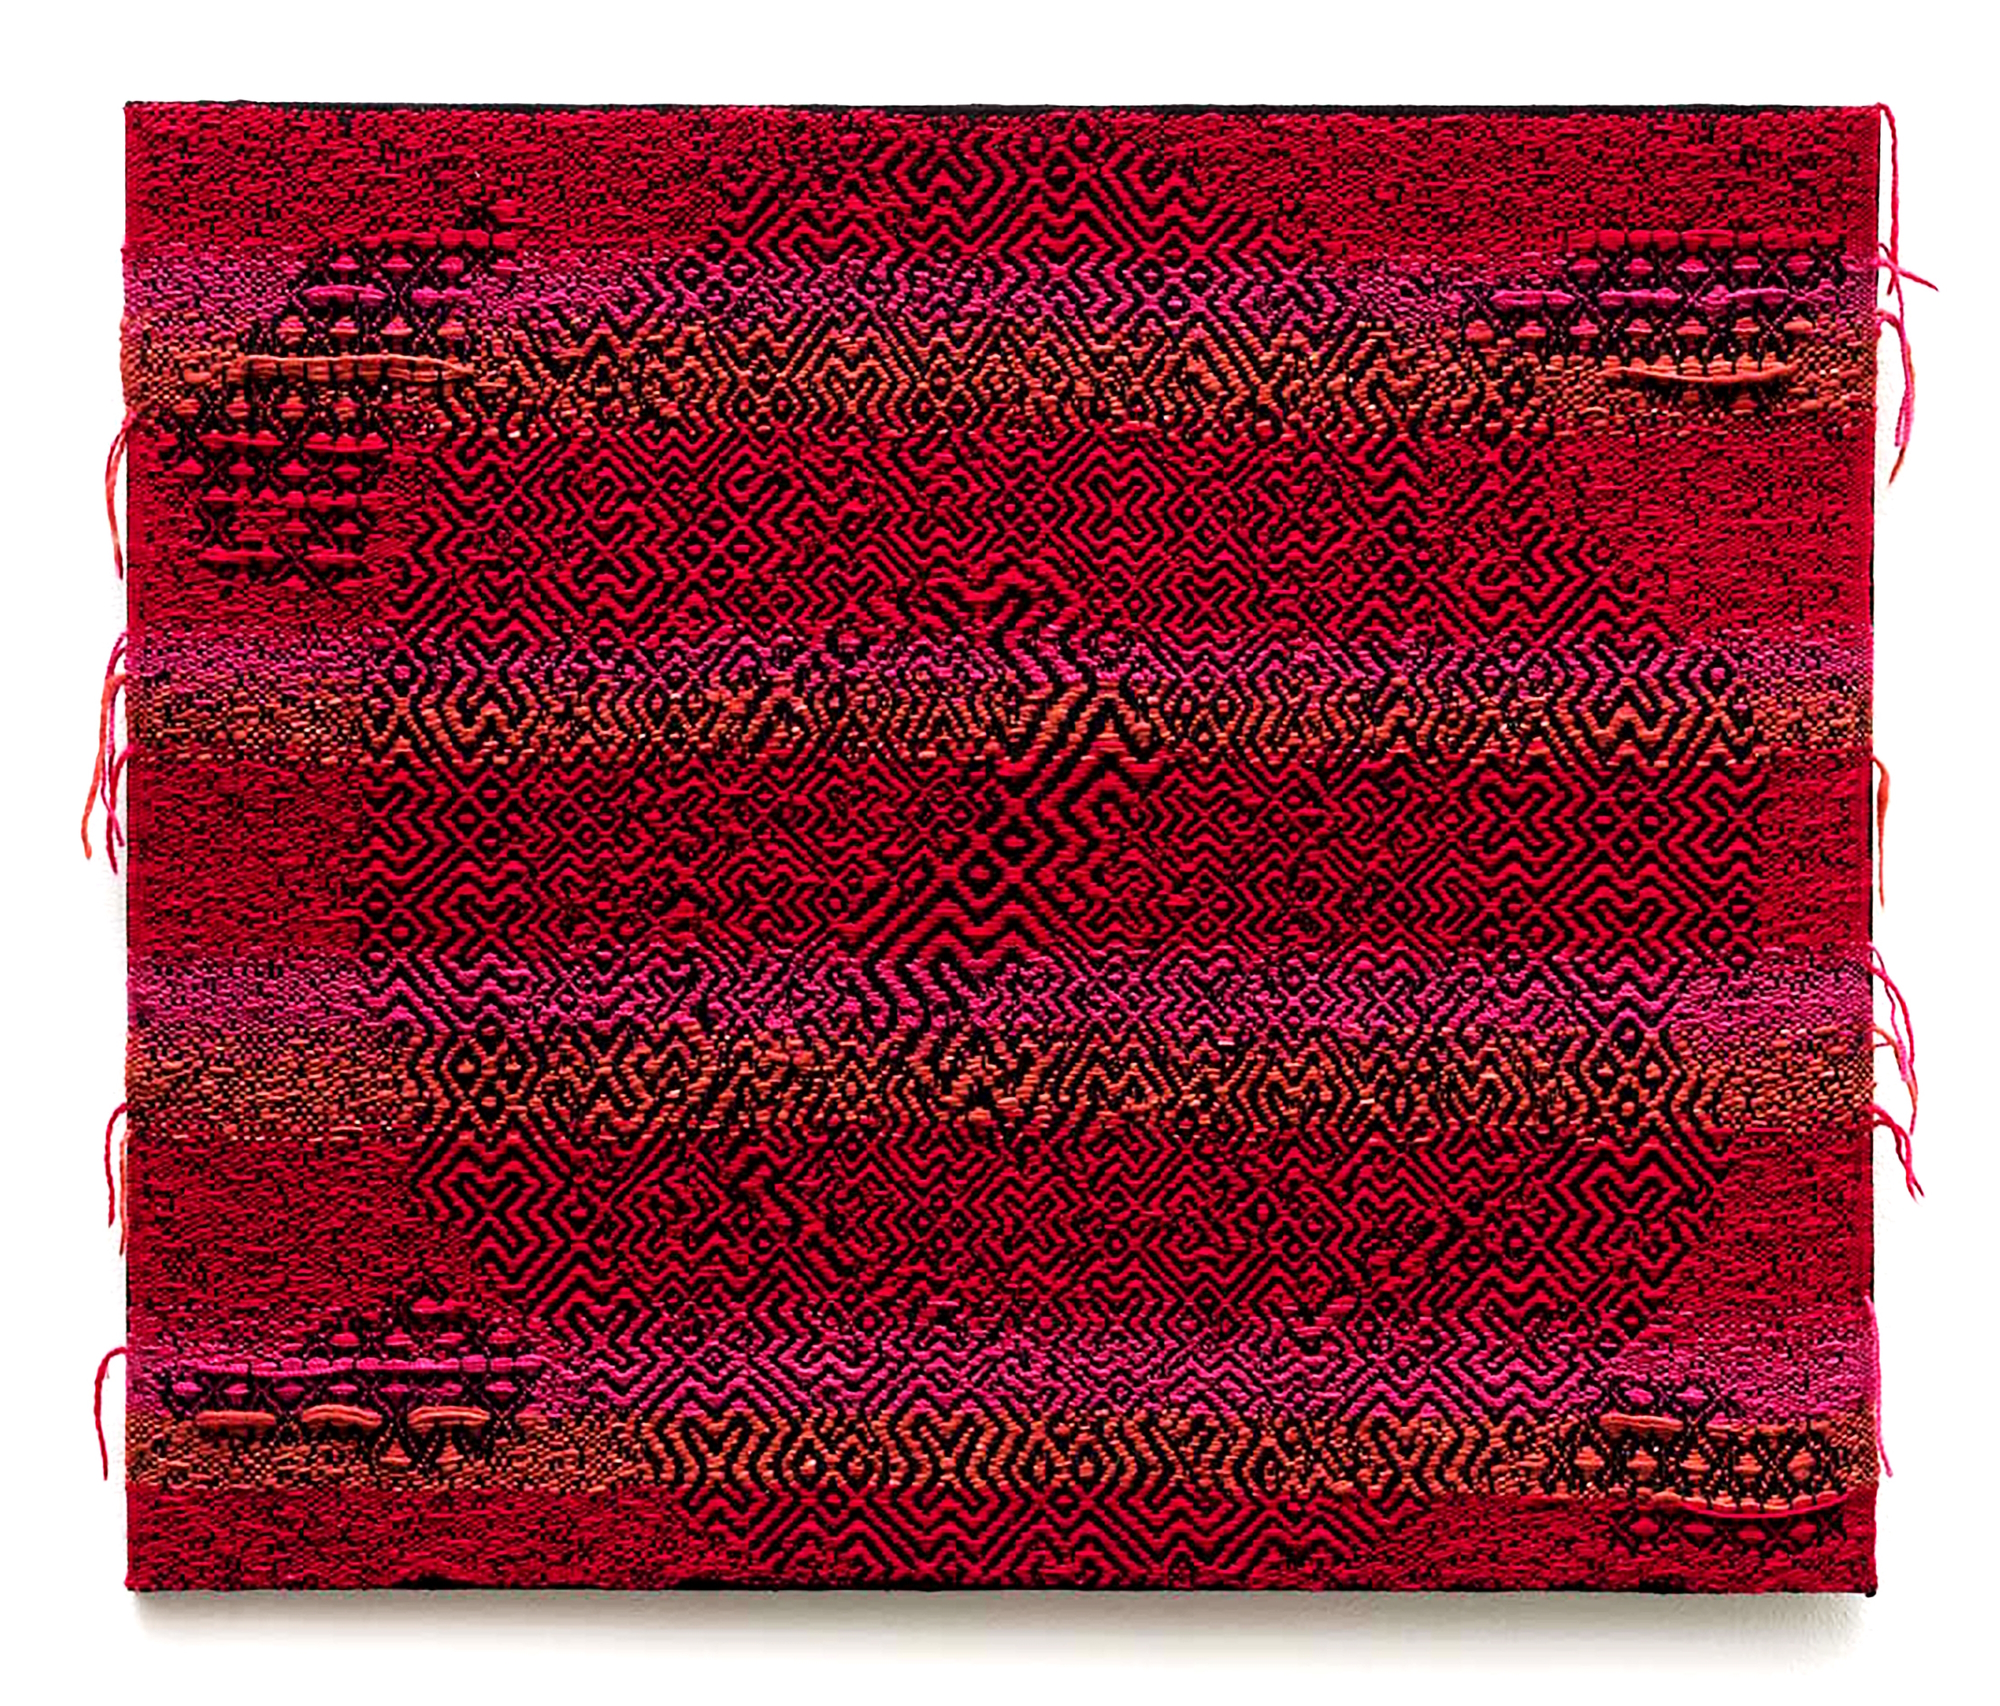 Sarah Rosalena, Spiral Arm Red, 2023. Hand-dyed cochineal wool yarn, cotton yarn, image source Milky Way Galaxy. Courtesy of the artist, photo by Ruben Diaz